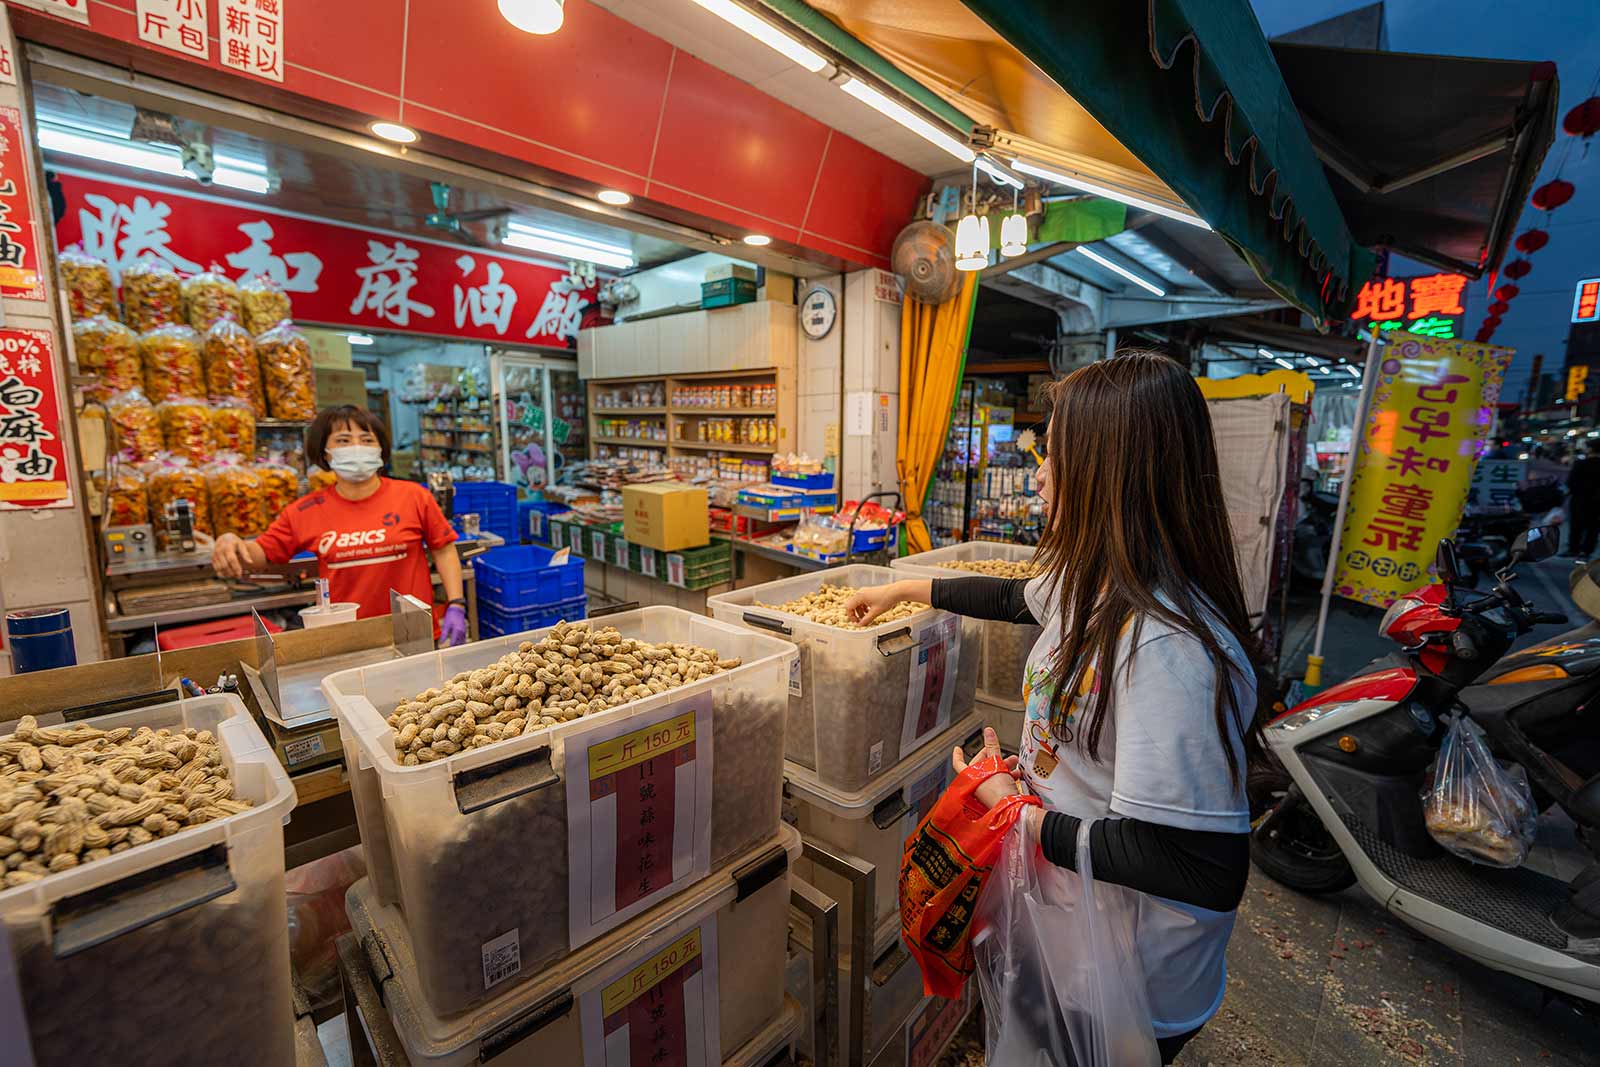 Cartons of peanuts for sale are piled outside of a shop specializing in sesame oil.